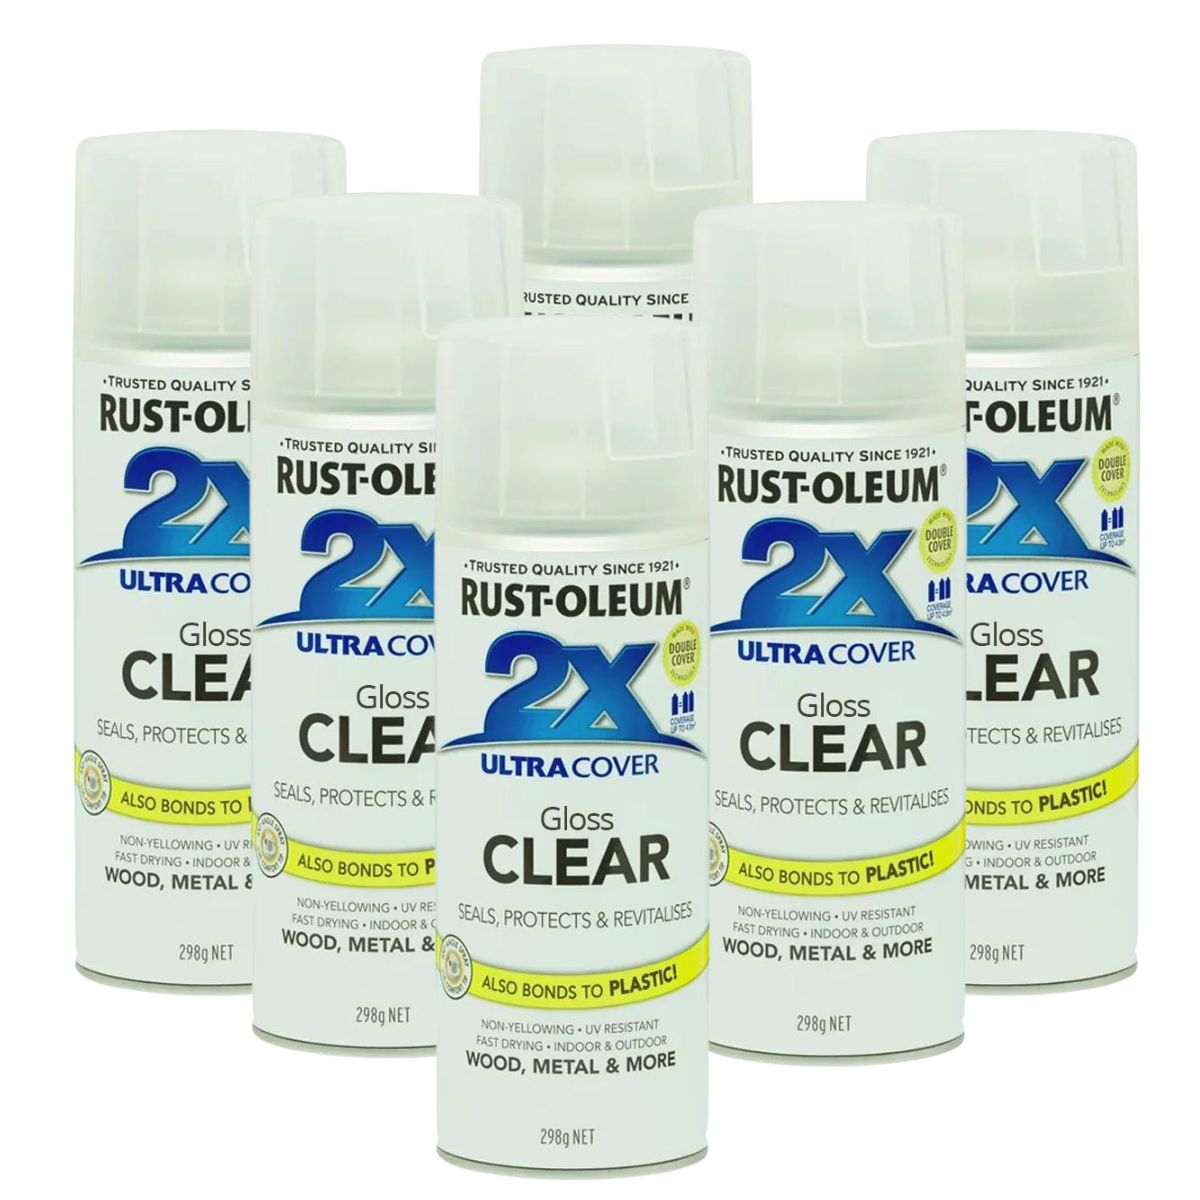 Rustloleum 2x Ultra Cover Paint & Primer, Gloss Clear - 6 cans - South East Clearance Centre